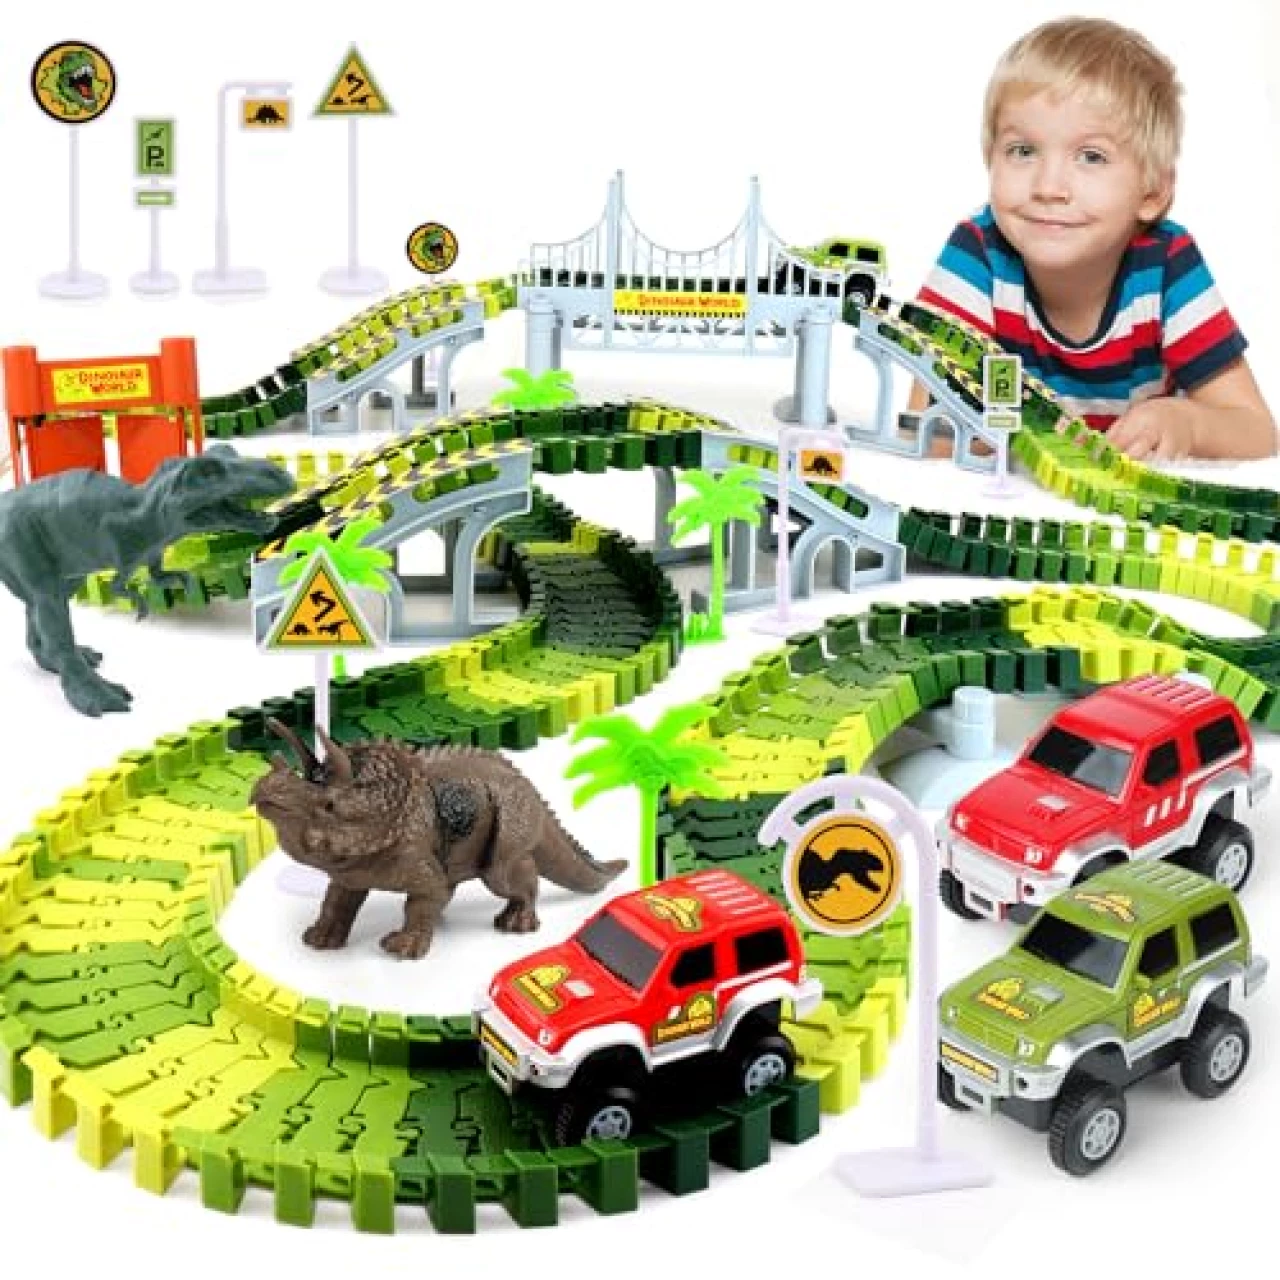 Dinosaur Toys for Kids 3-5, Create A Dino World with Bendable Flexible Racetrack Cars and Dinosaurs